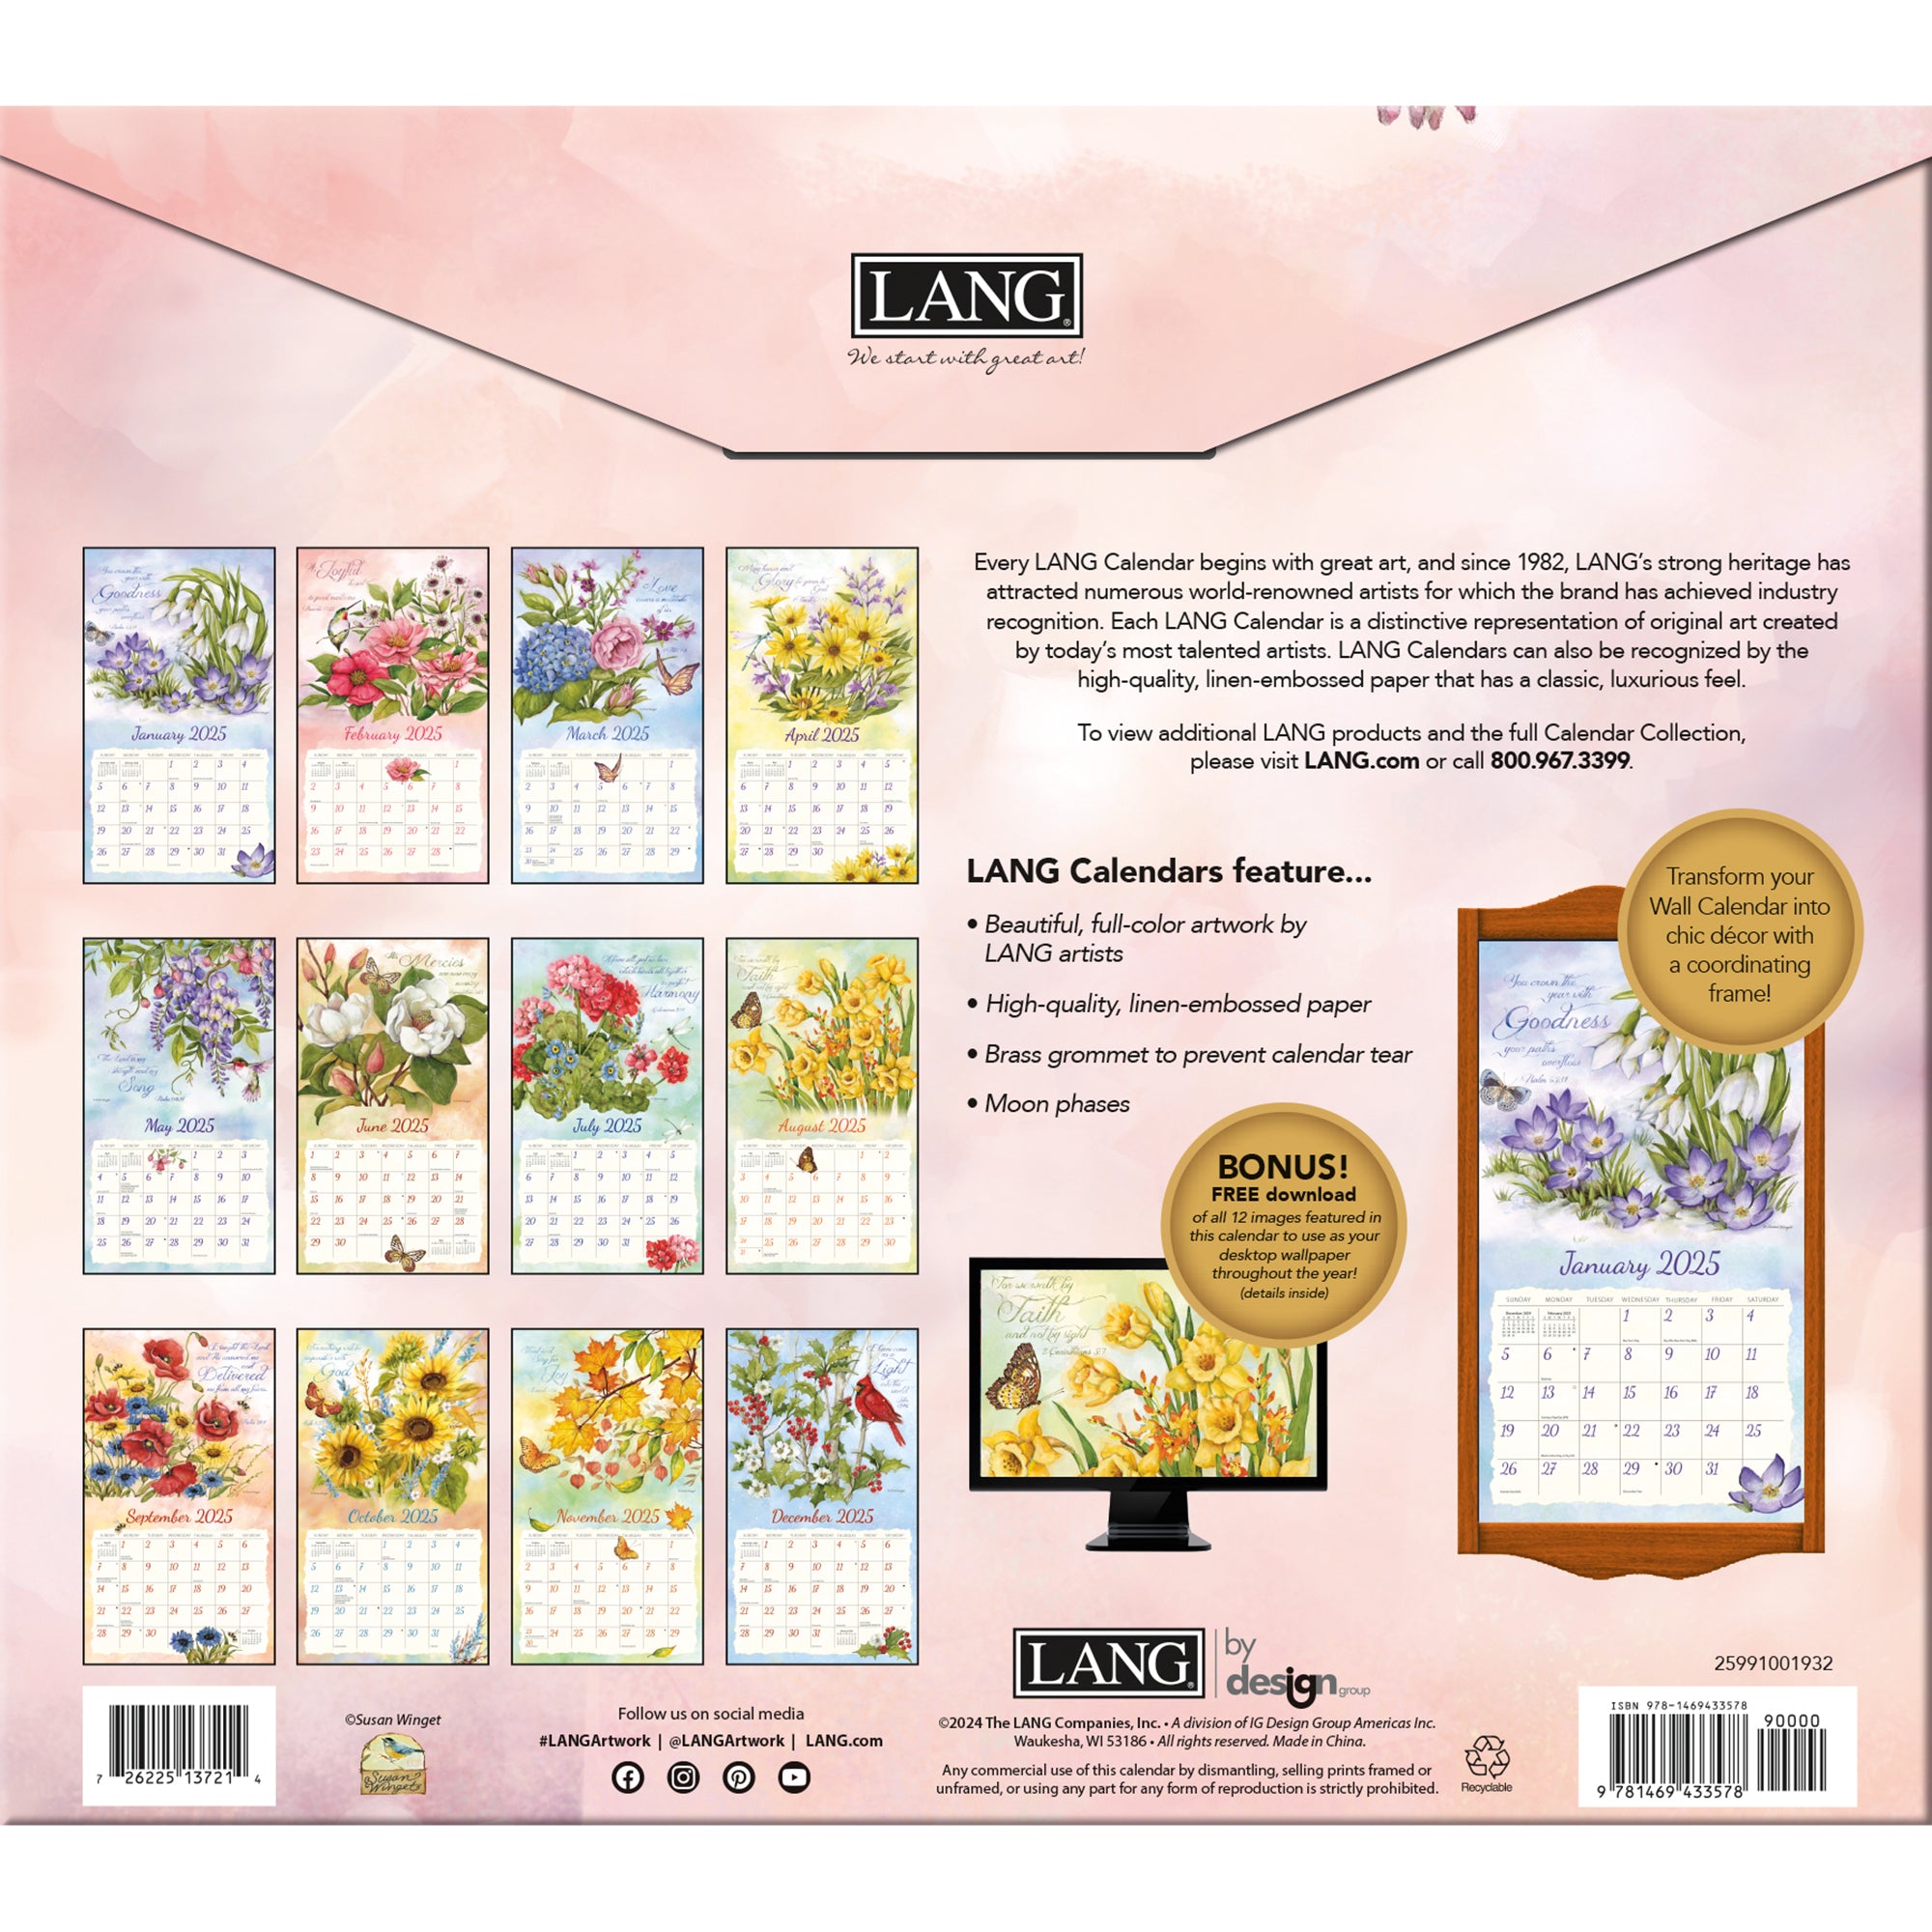 2025 Nature's Grace by Susan Winget - LANG Deluxe Wall Calendar